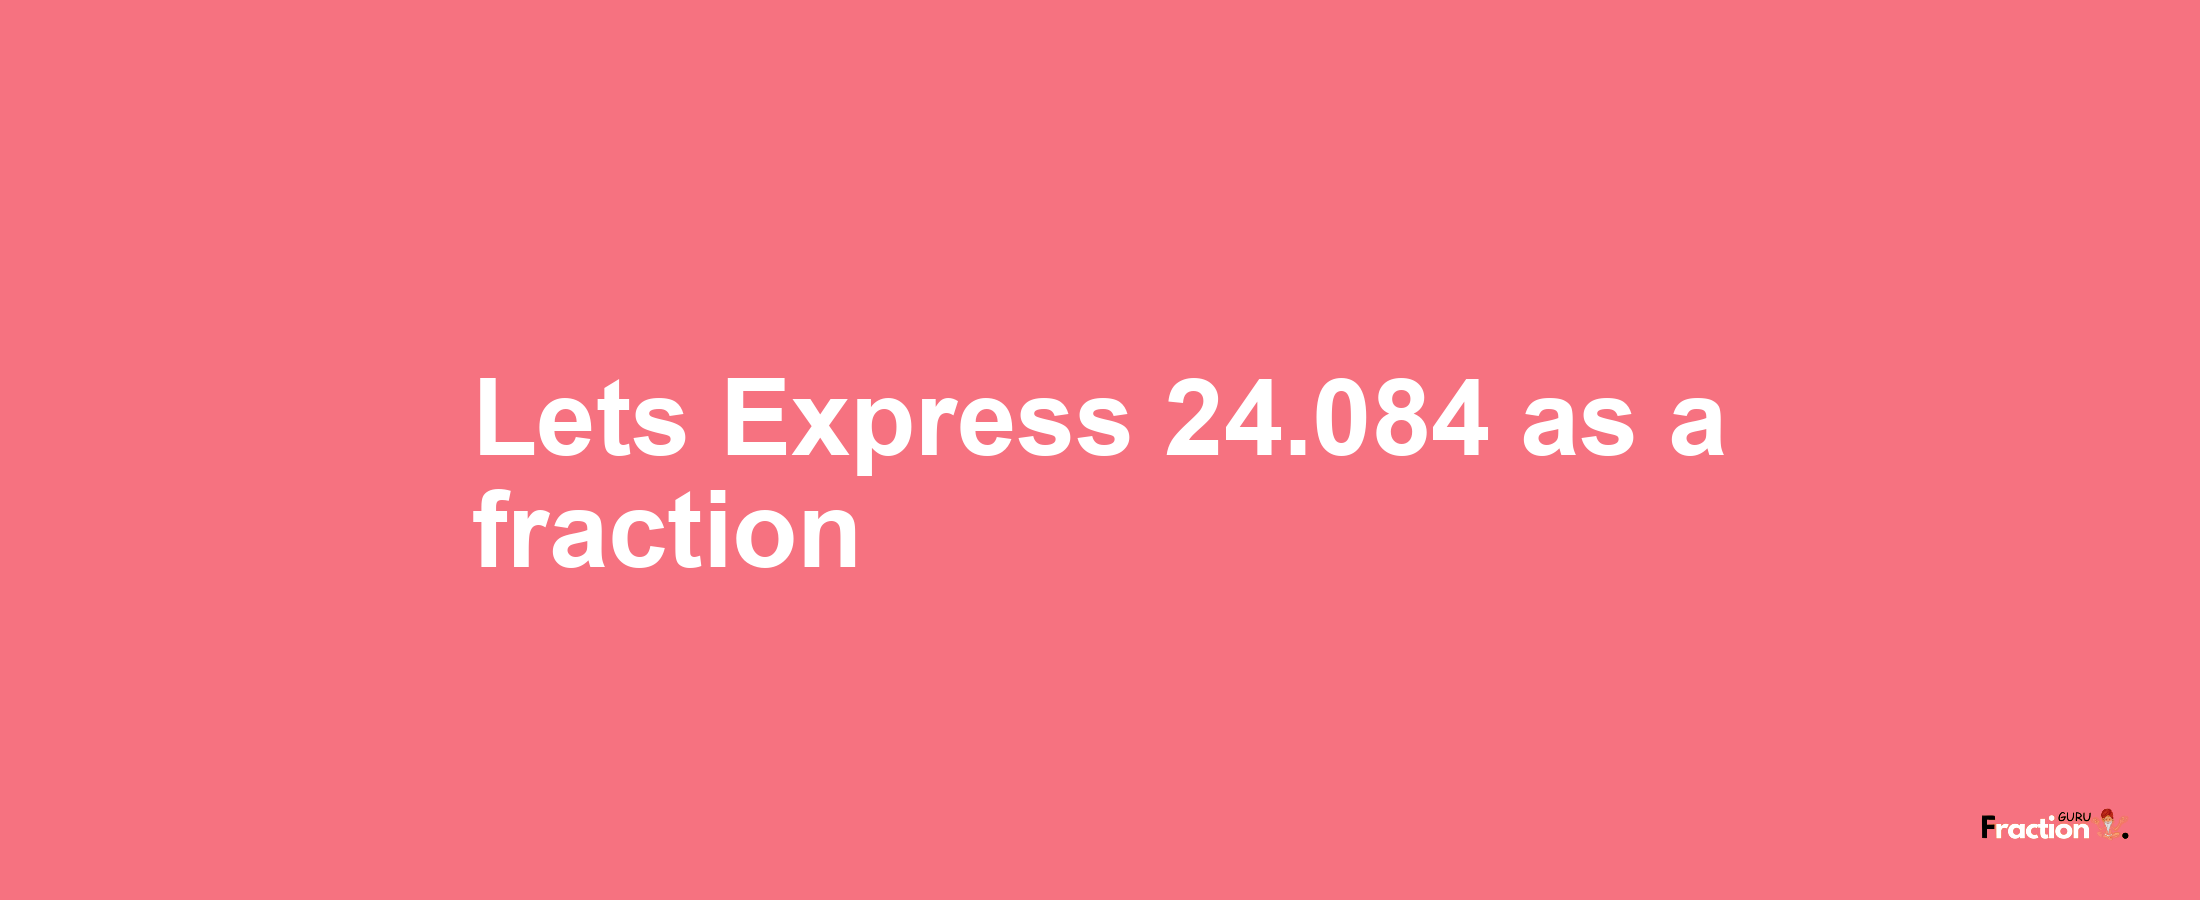 Lets Express 24.084 as afraction